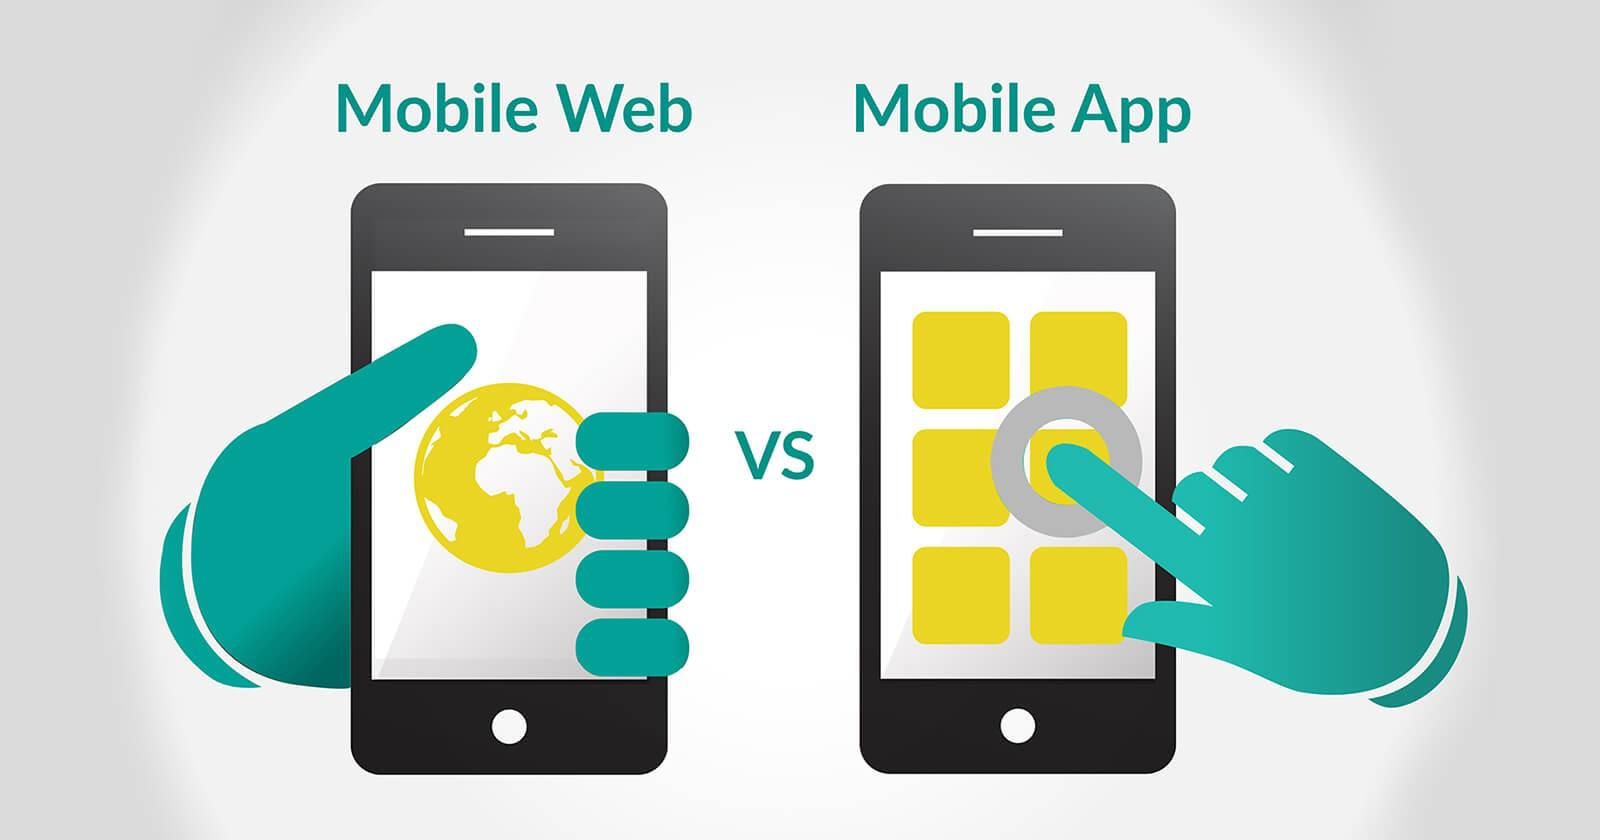 The quickest way to develop mobile and web apps